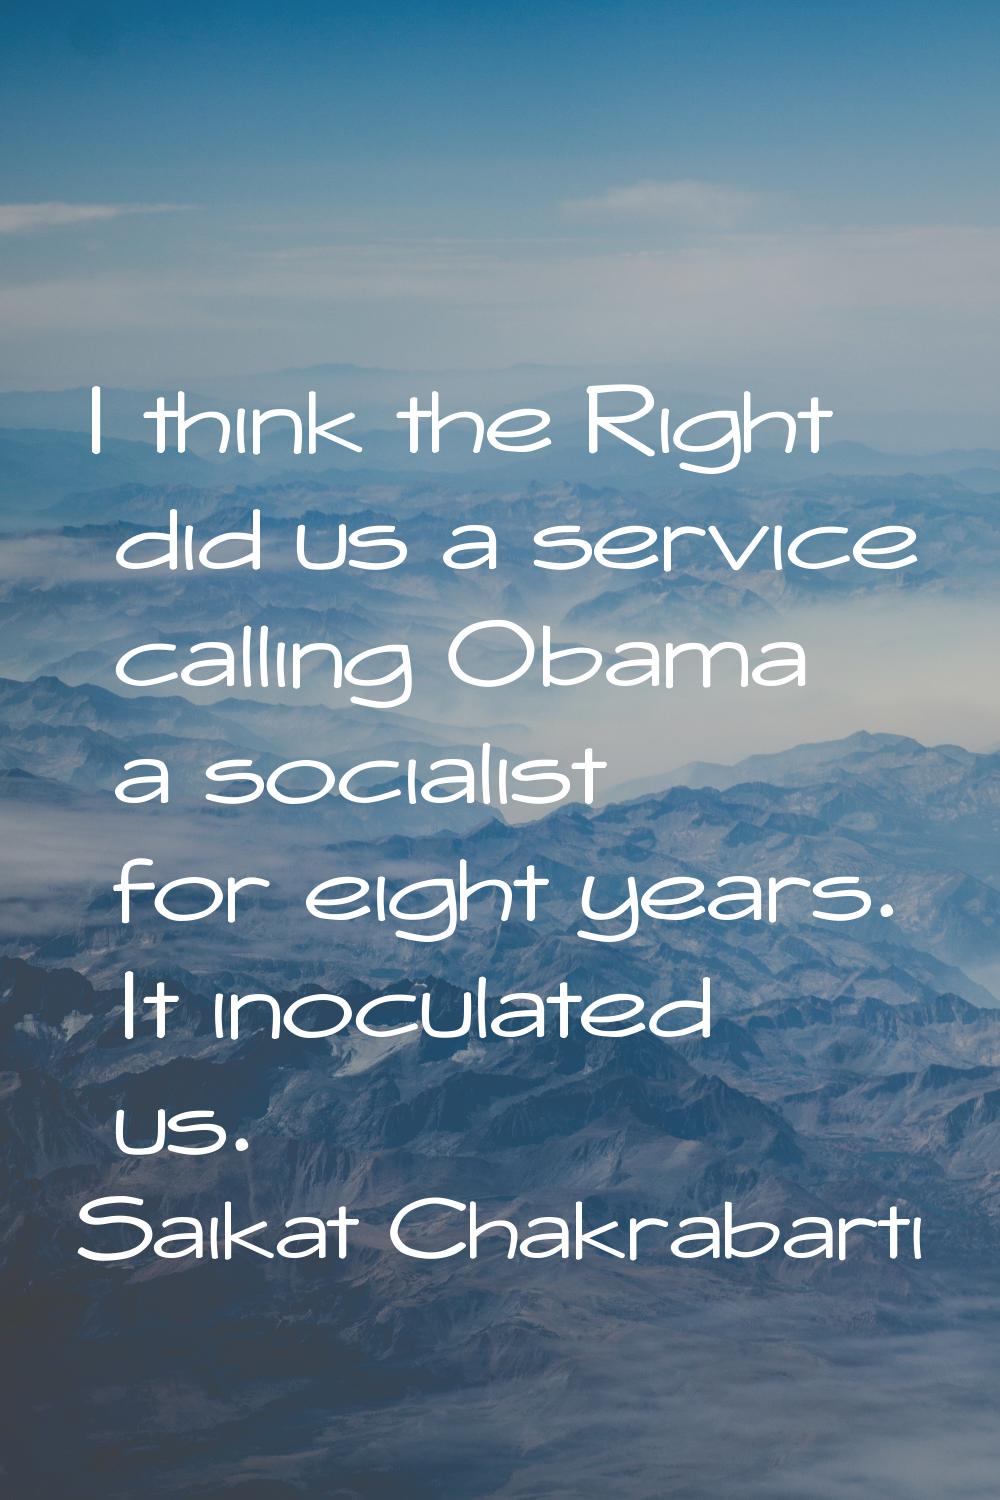 I think the Right did us a service calling Obama a socialist for eight years. It inoculated us.